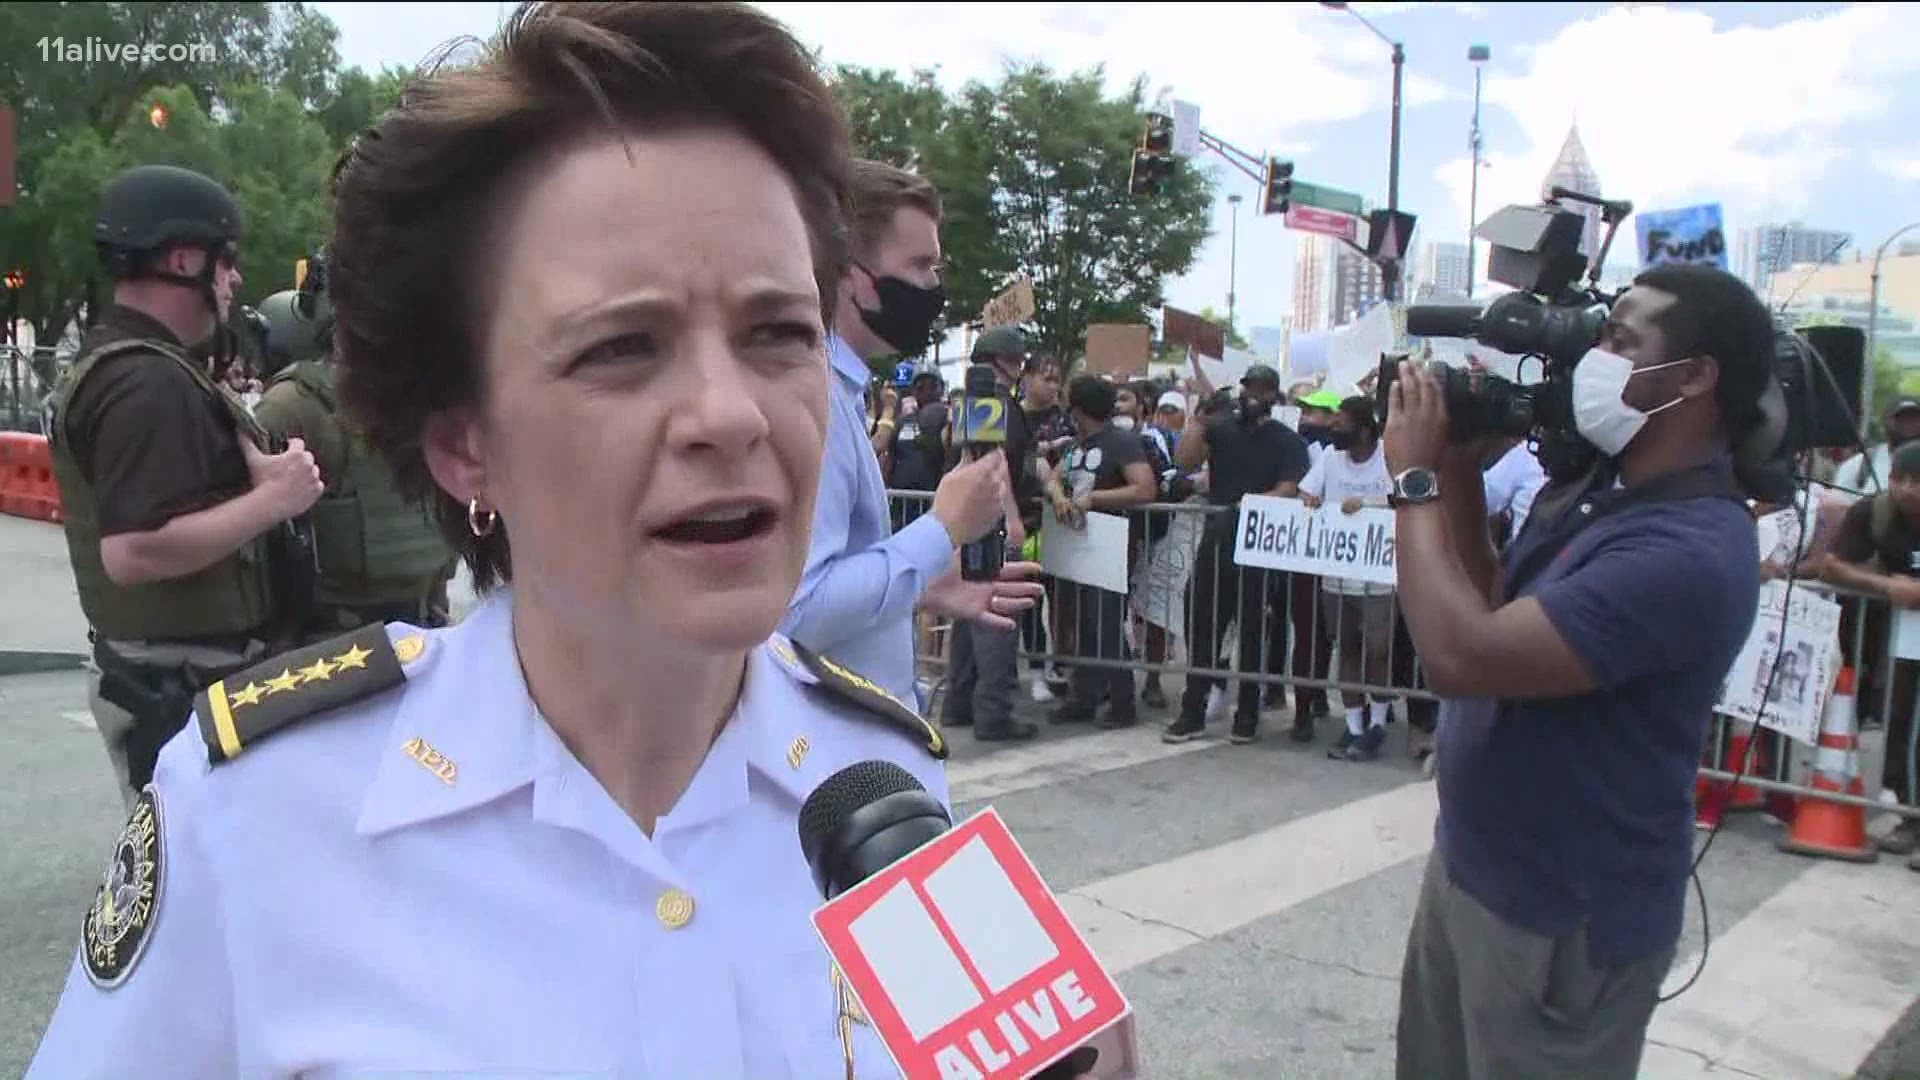 Atlanta Police Chief Erika Shields resigned following a police shooting that killed a man.